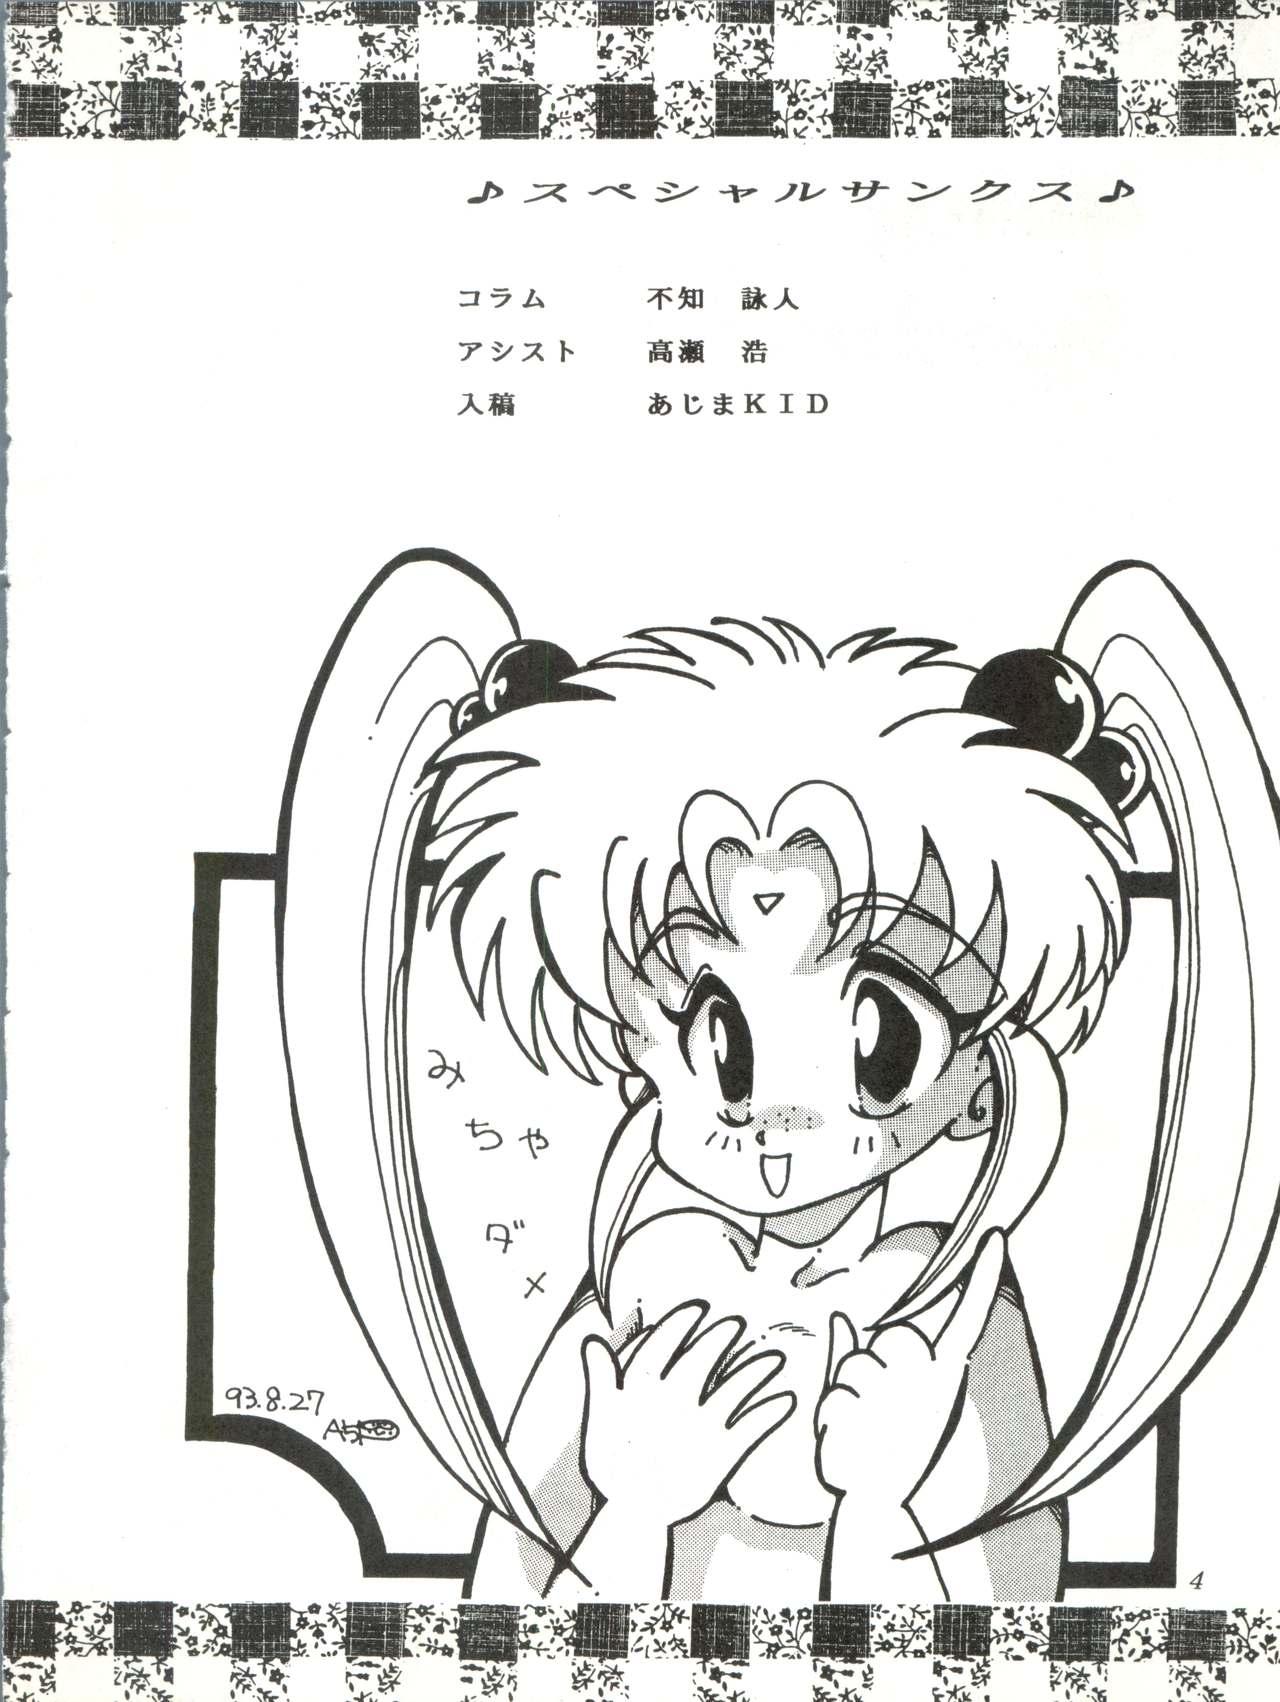 Girl Girl Milky Syndrome EX 2 - Sailor moon Tenchi muyo Pretty sammy Ghost sweeper mikami Ng knight lamune and 40 Tiny - Page 4